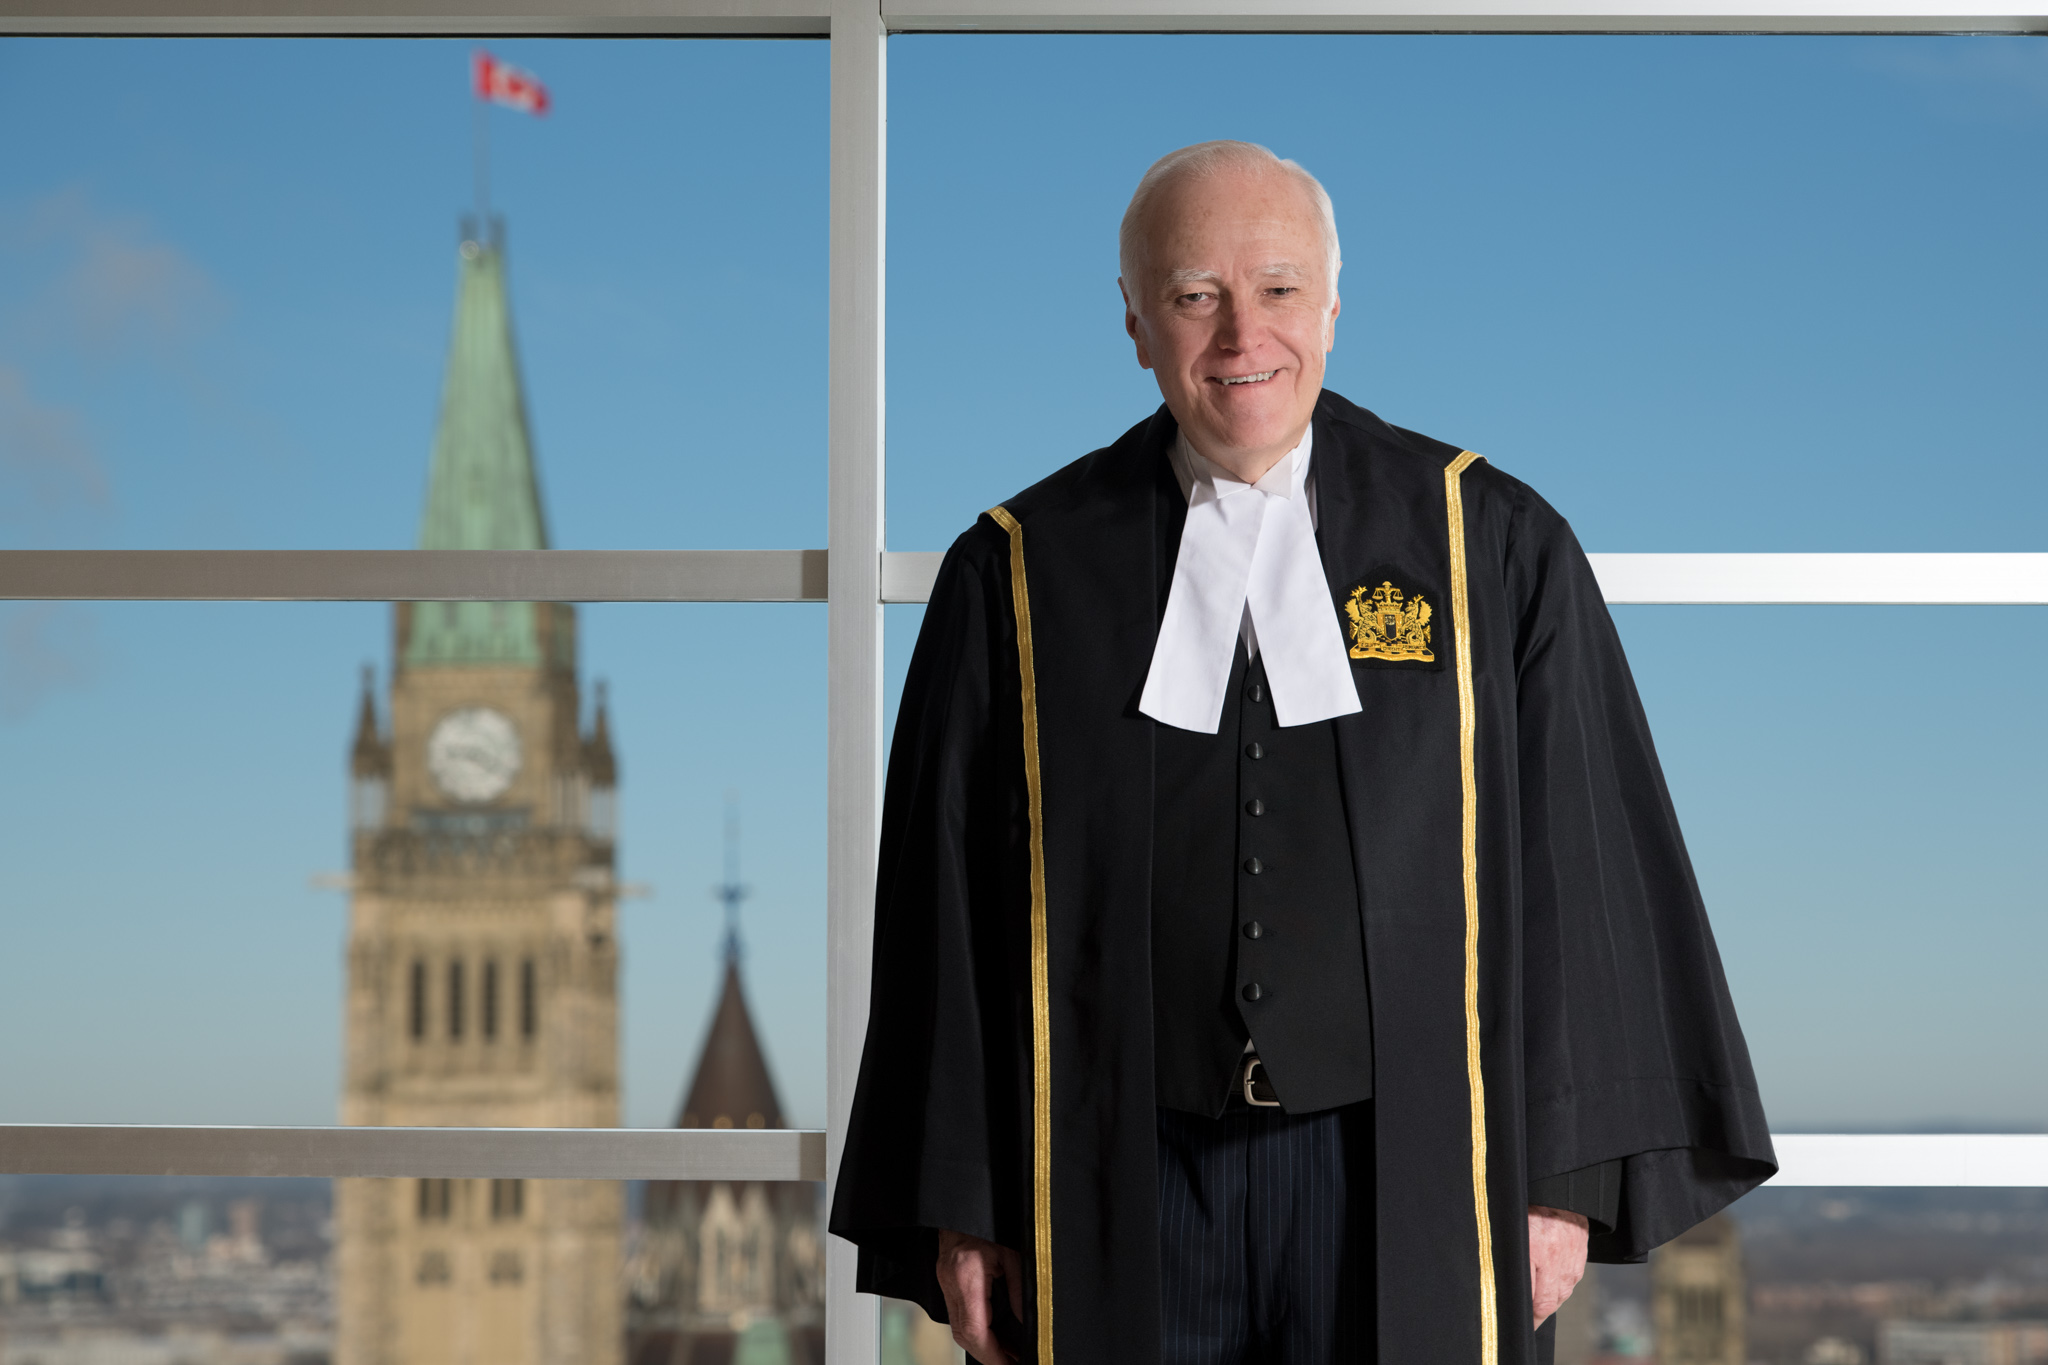 A Celebrate Sean of Justice in Canada, the Honourable Judge, Richard Mosley